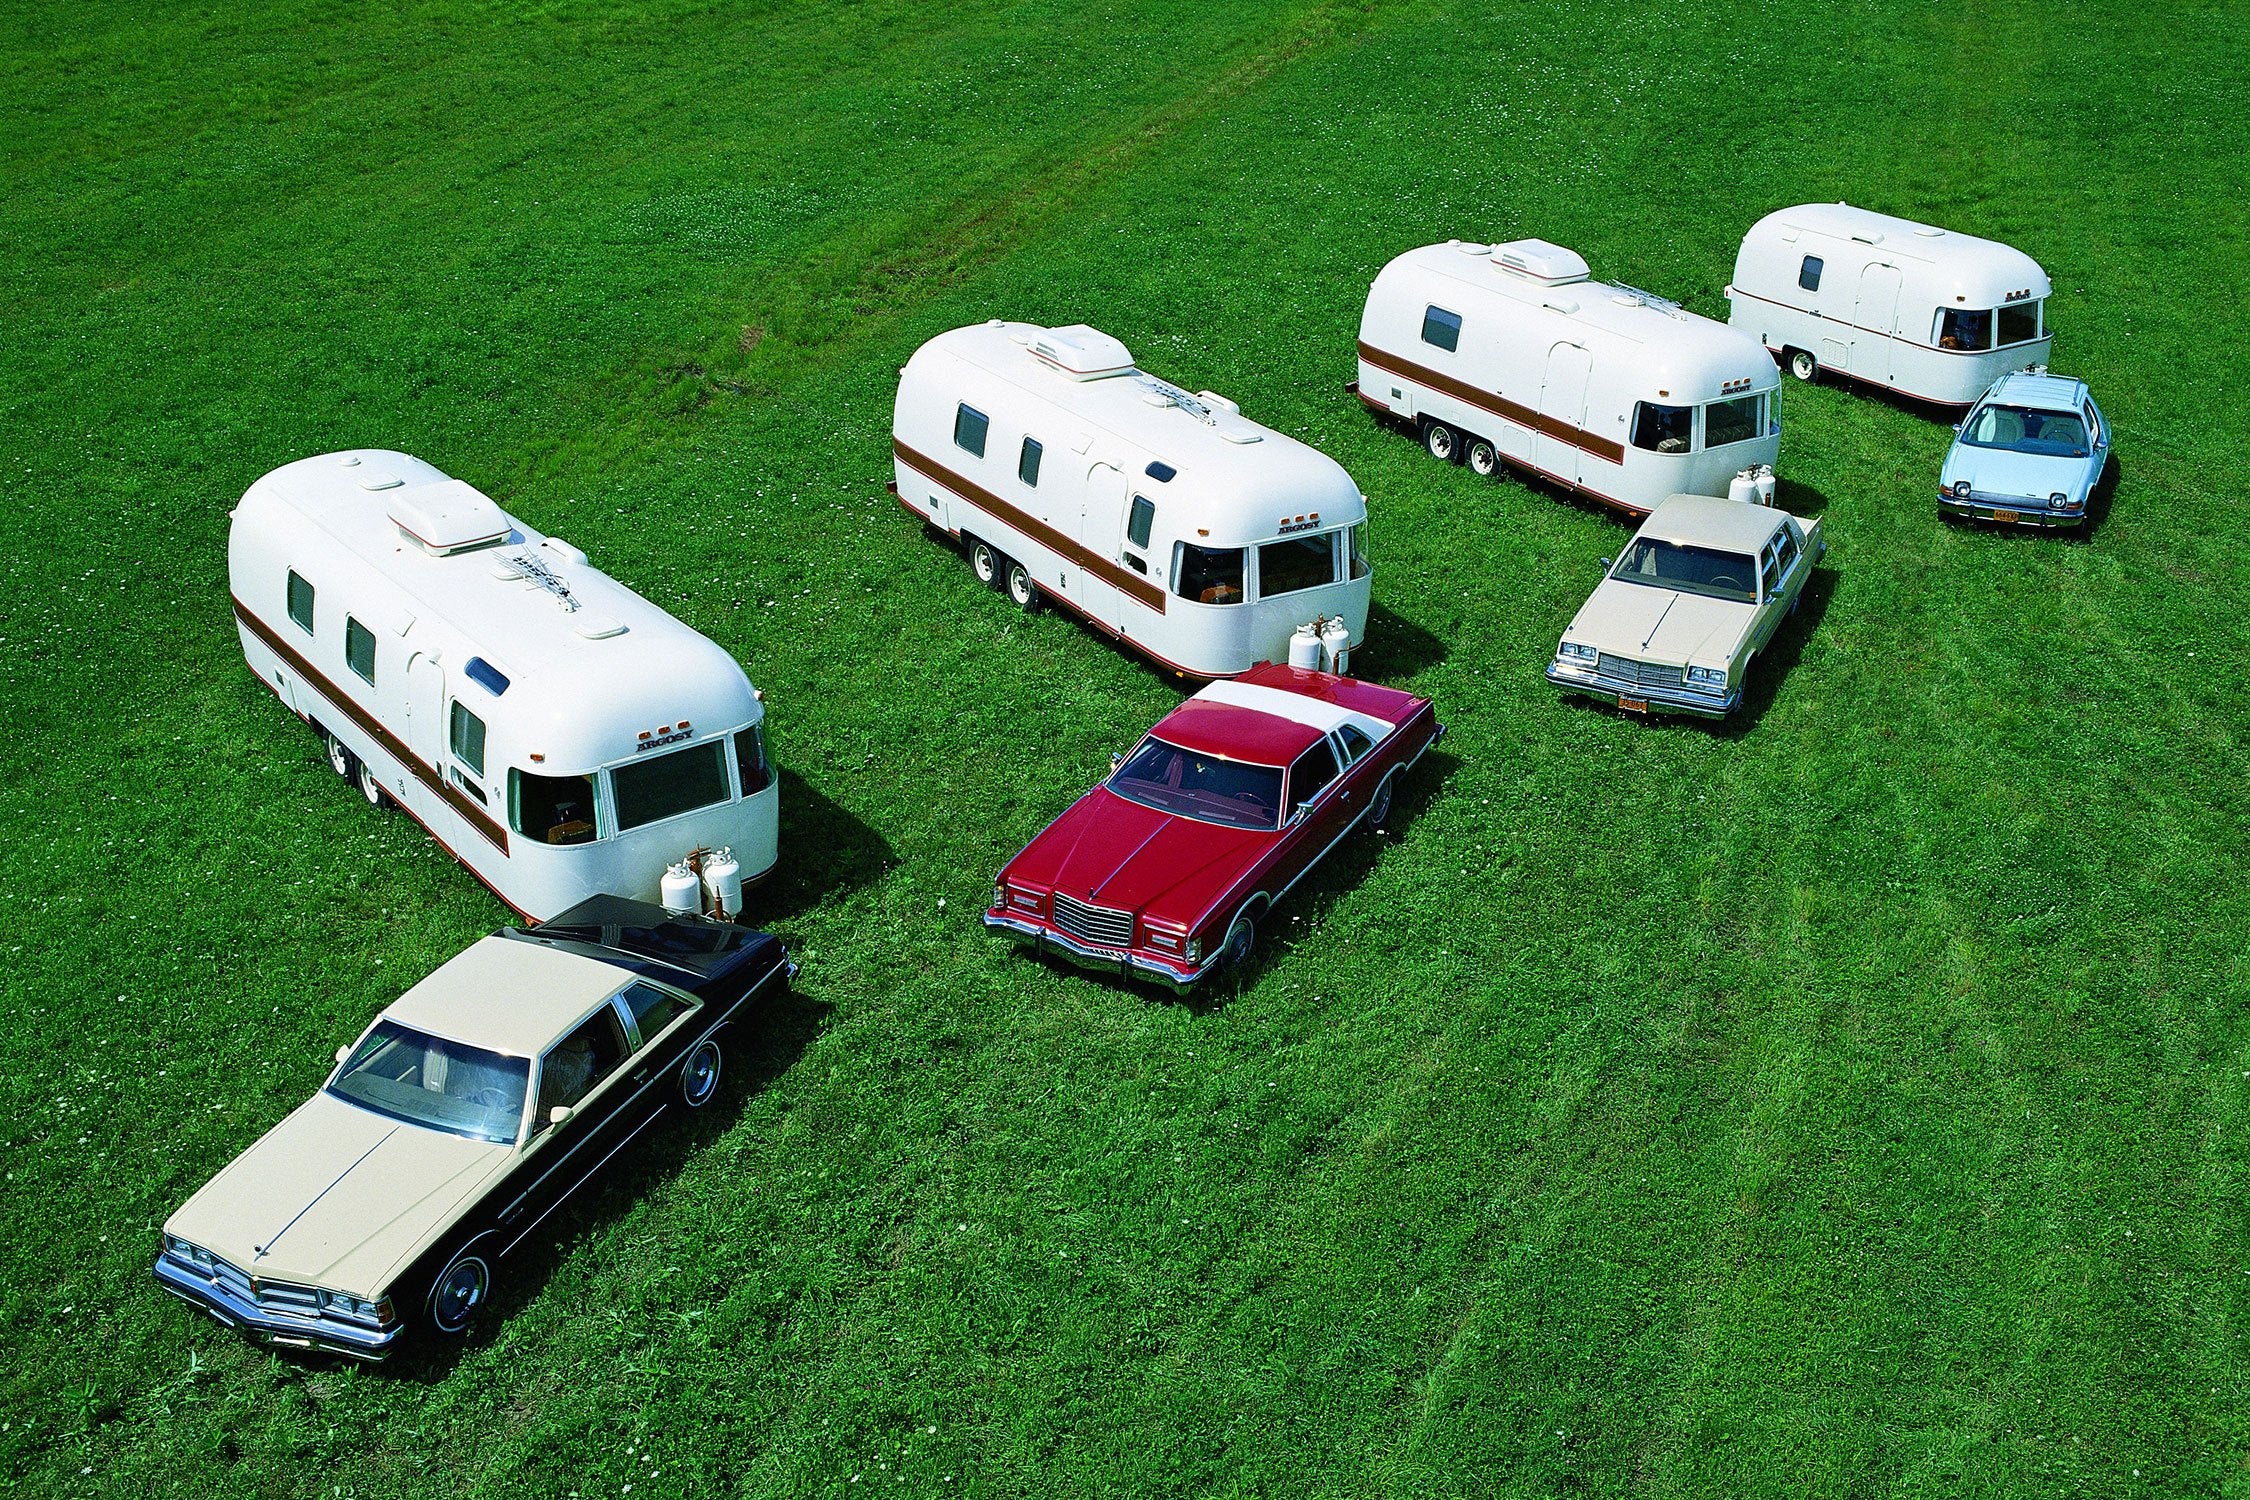 Airstream’s Old Painted Travel Trailers Are Still A Vintage RV Gem